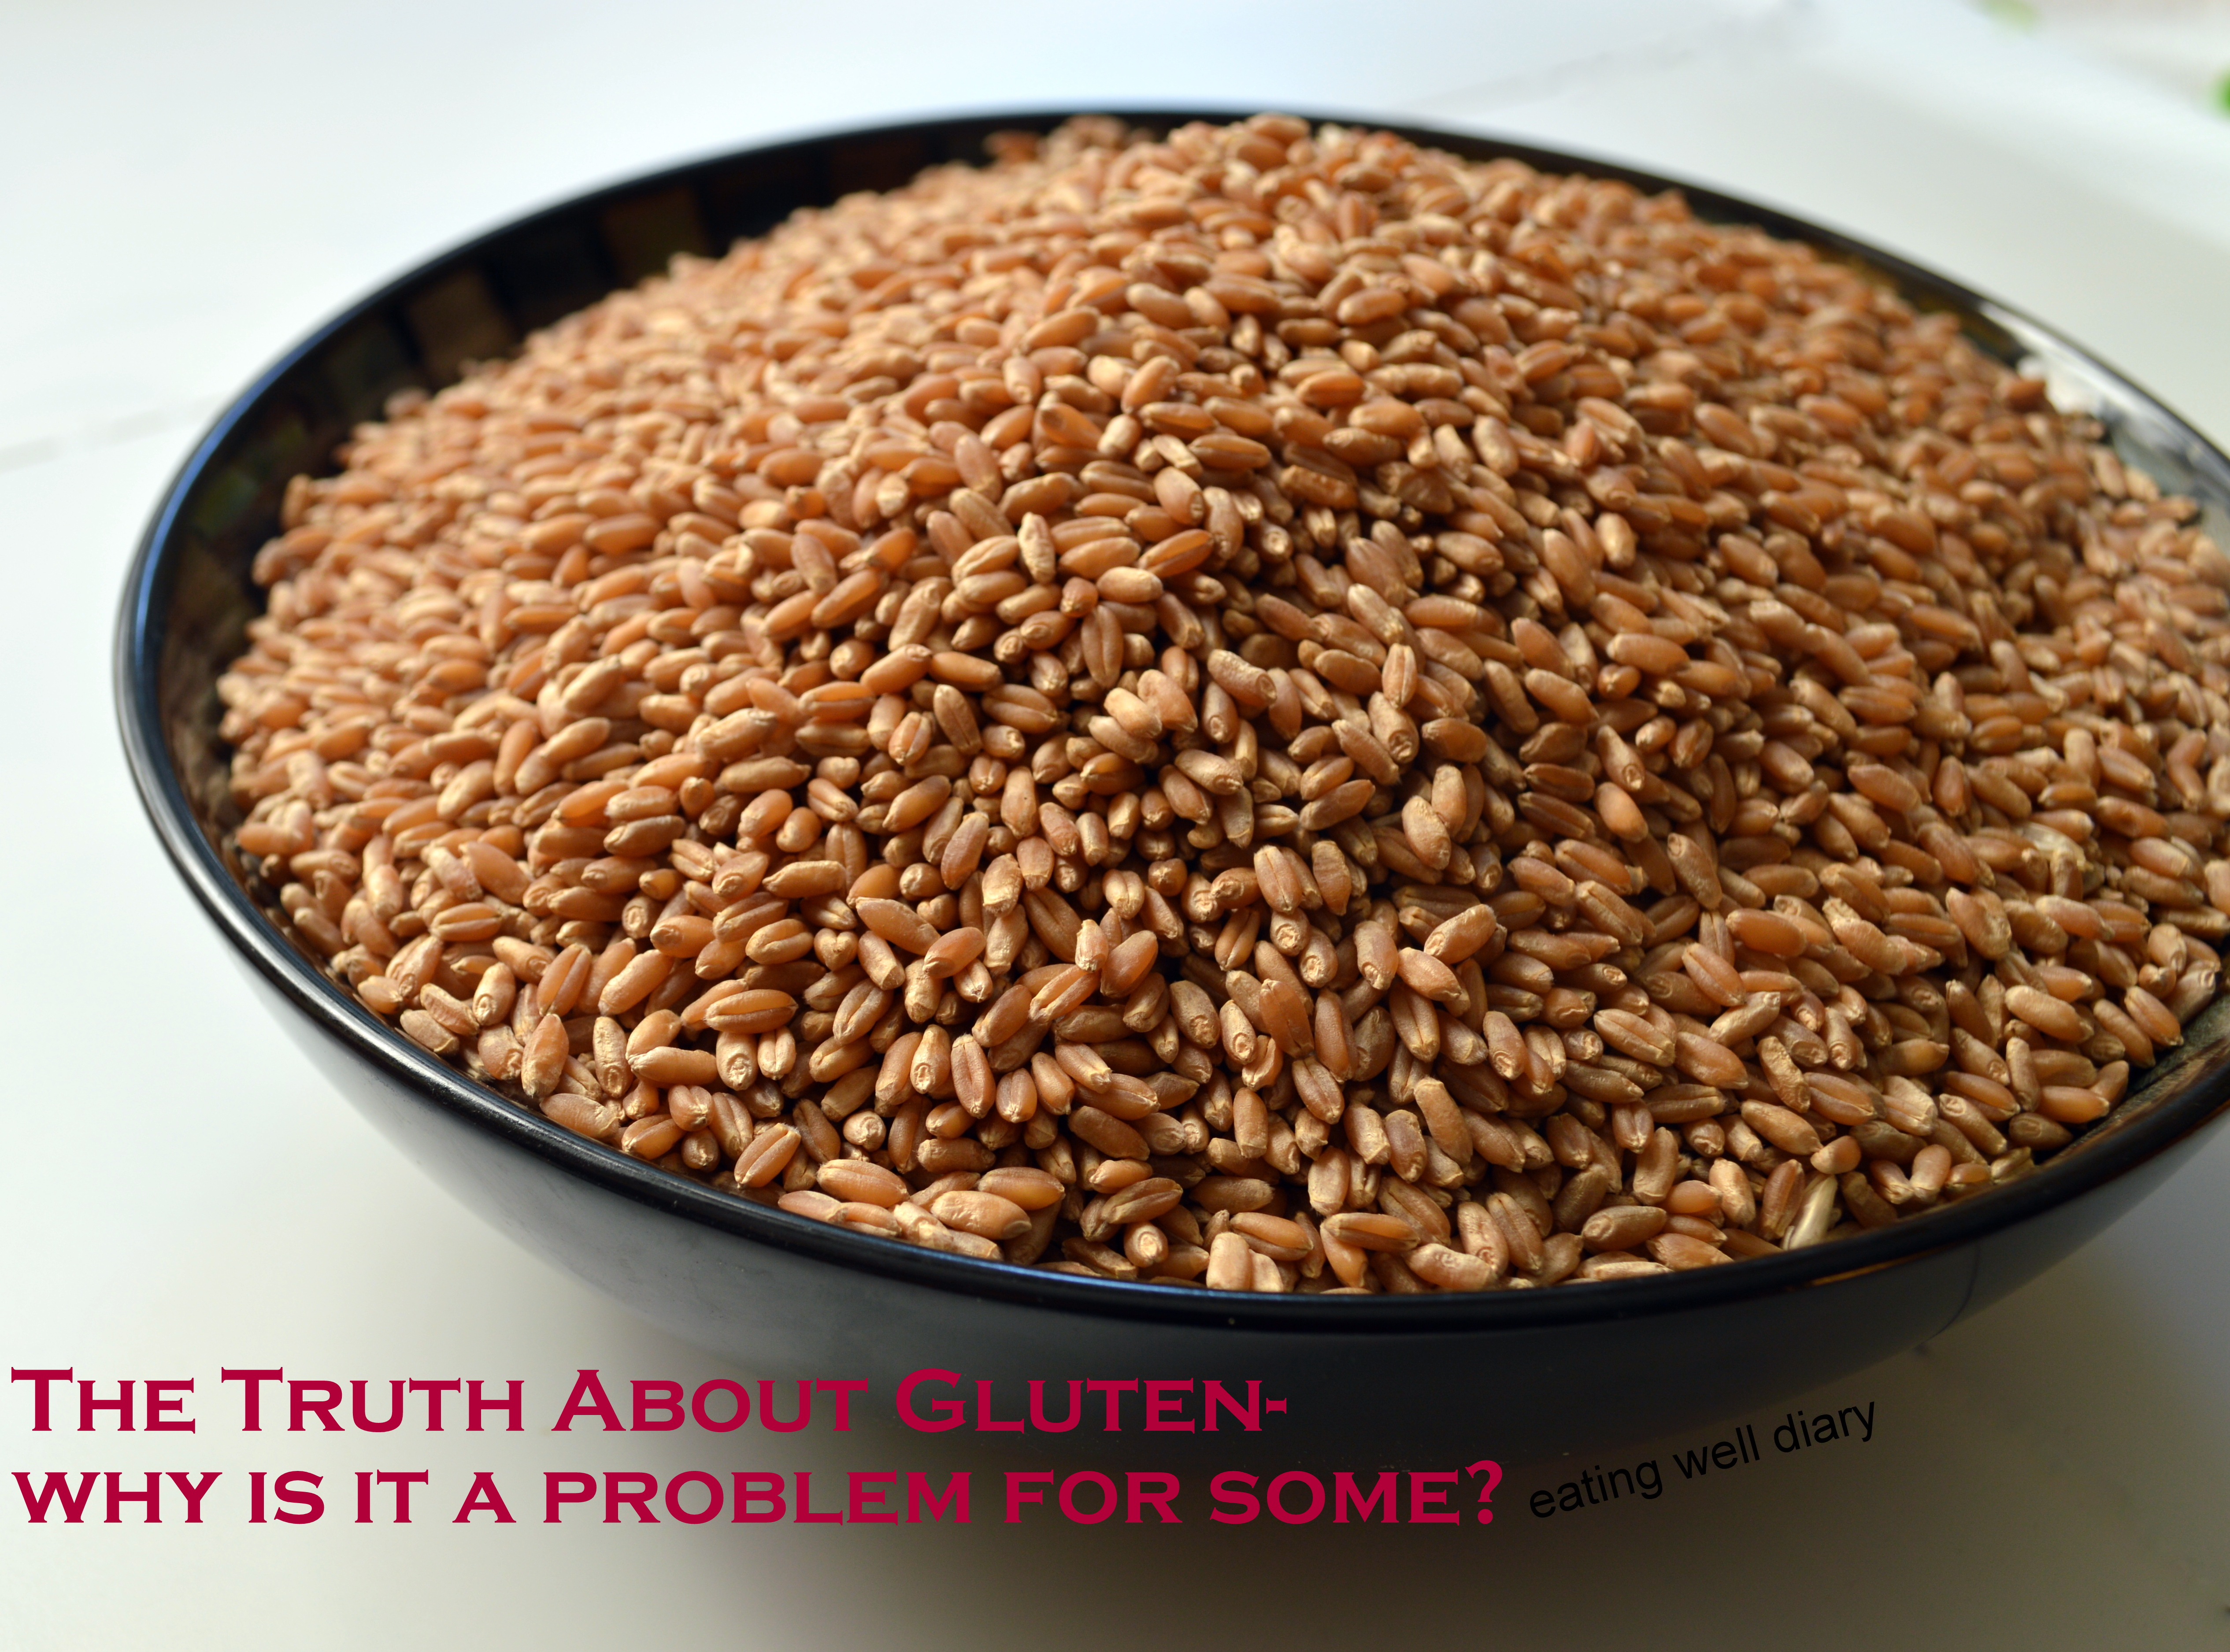 The Truth About Gluten- Why Is it A Problem For Some People?